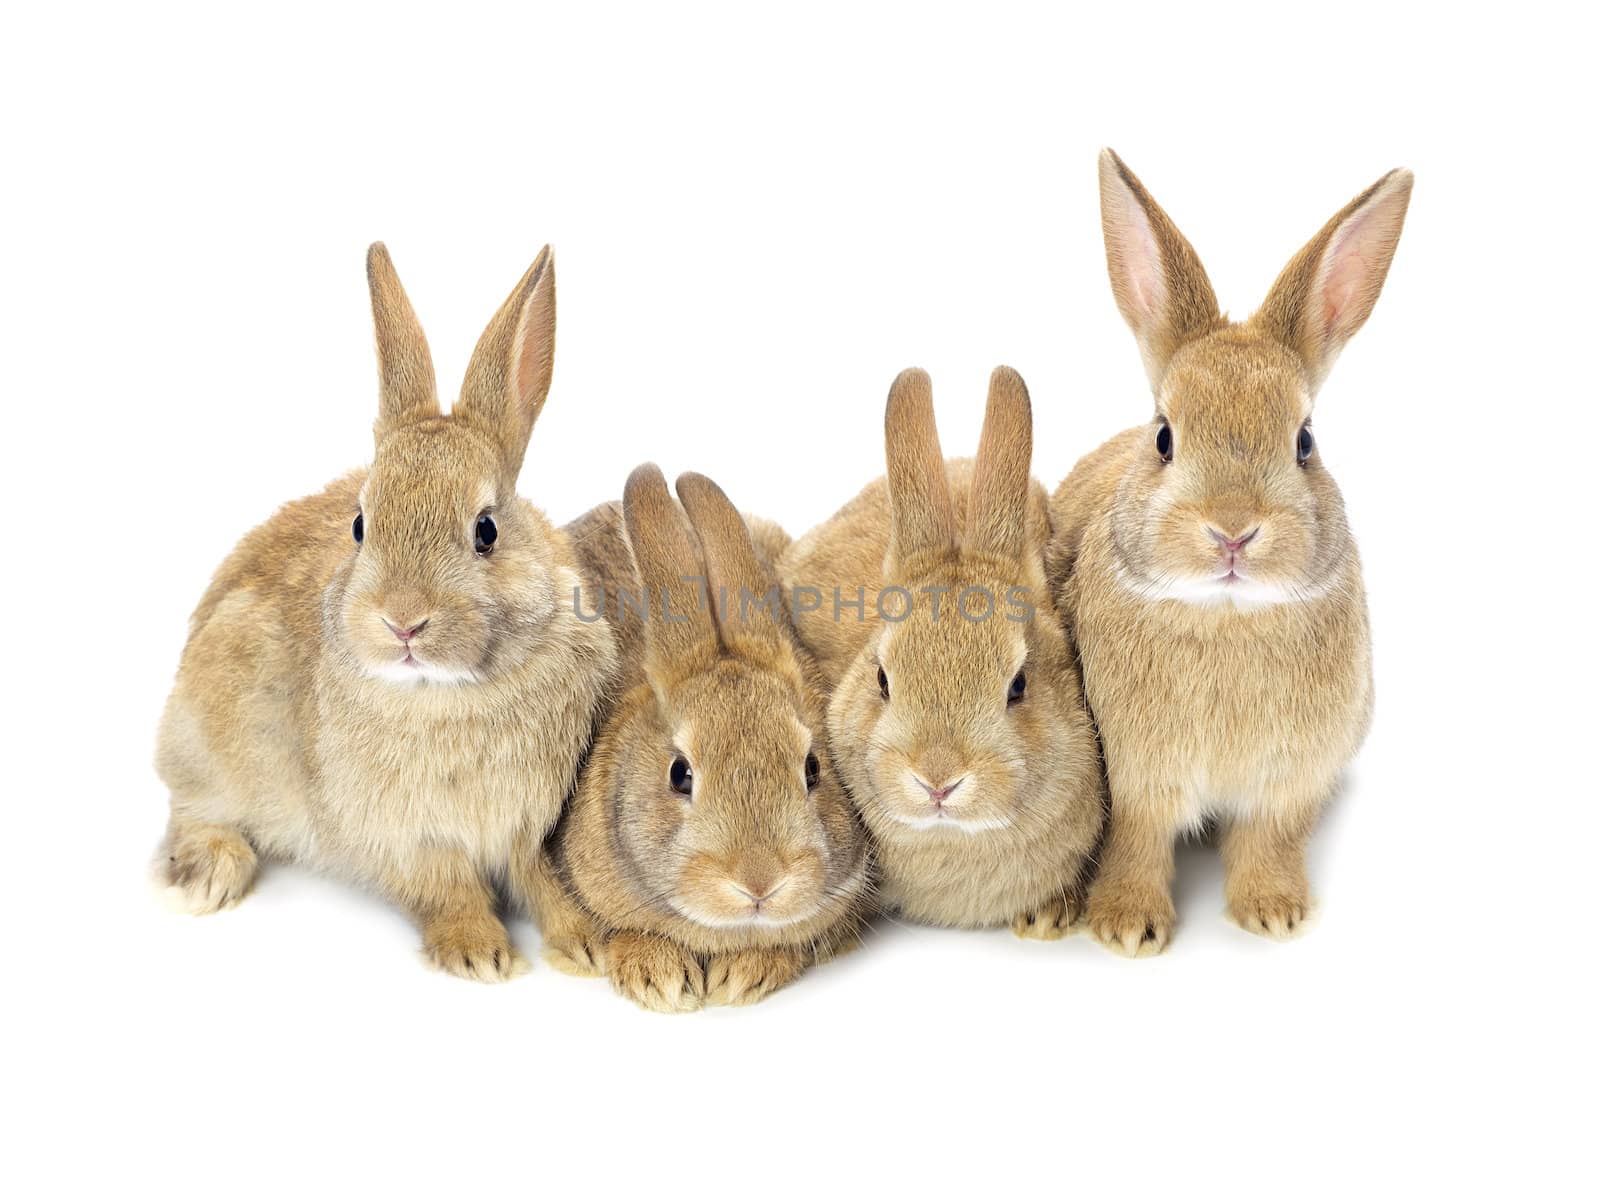 A picture of four lovely baby bunnies